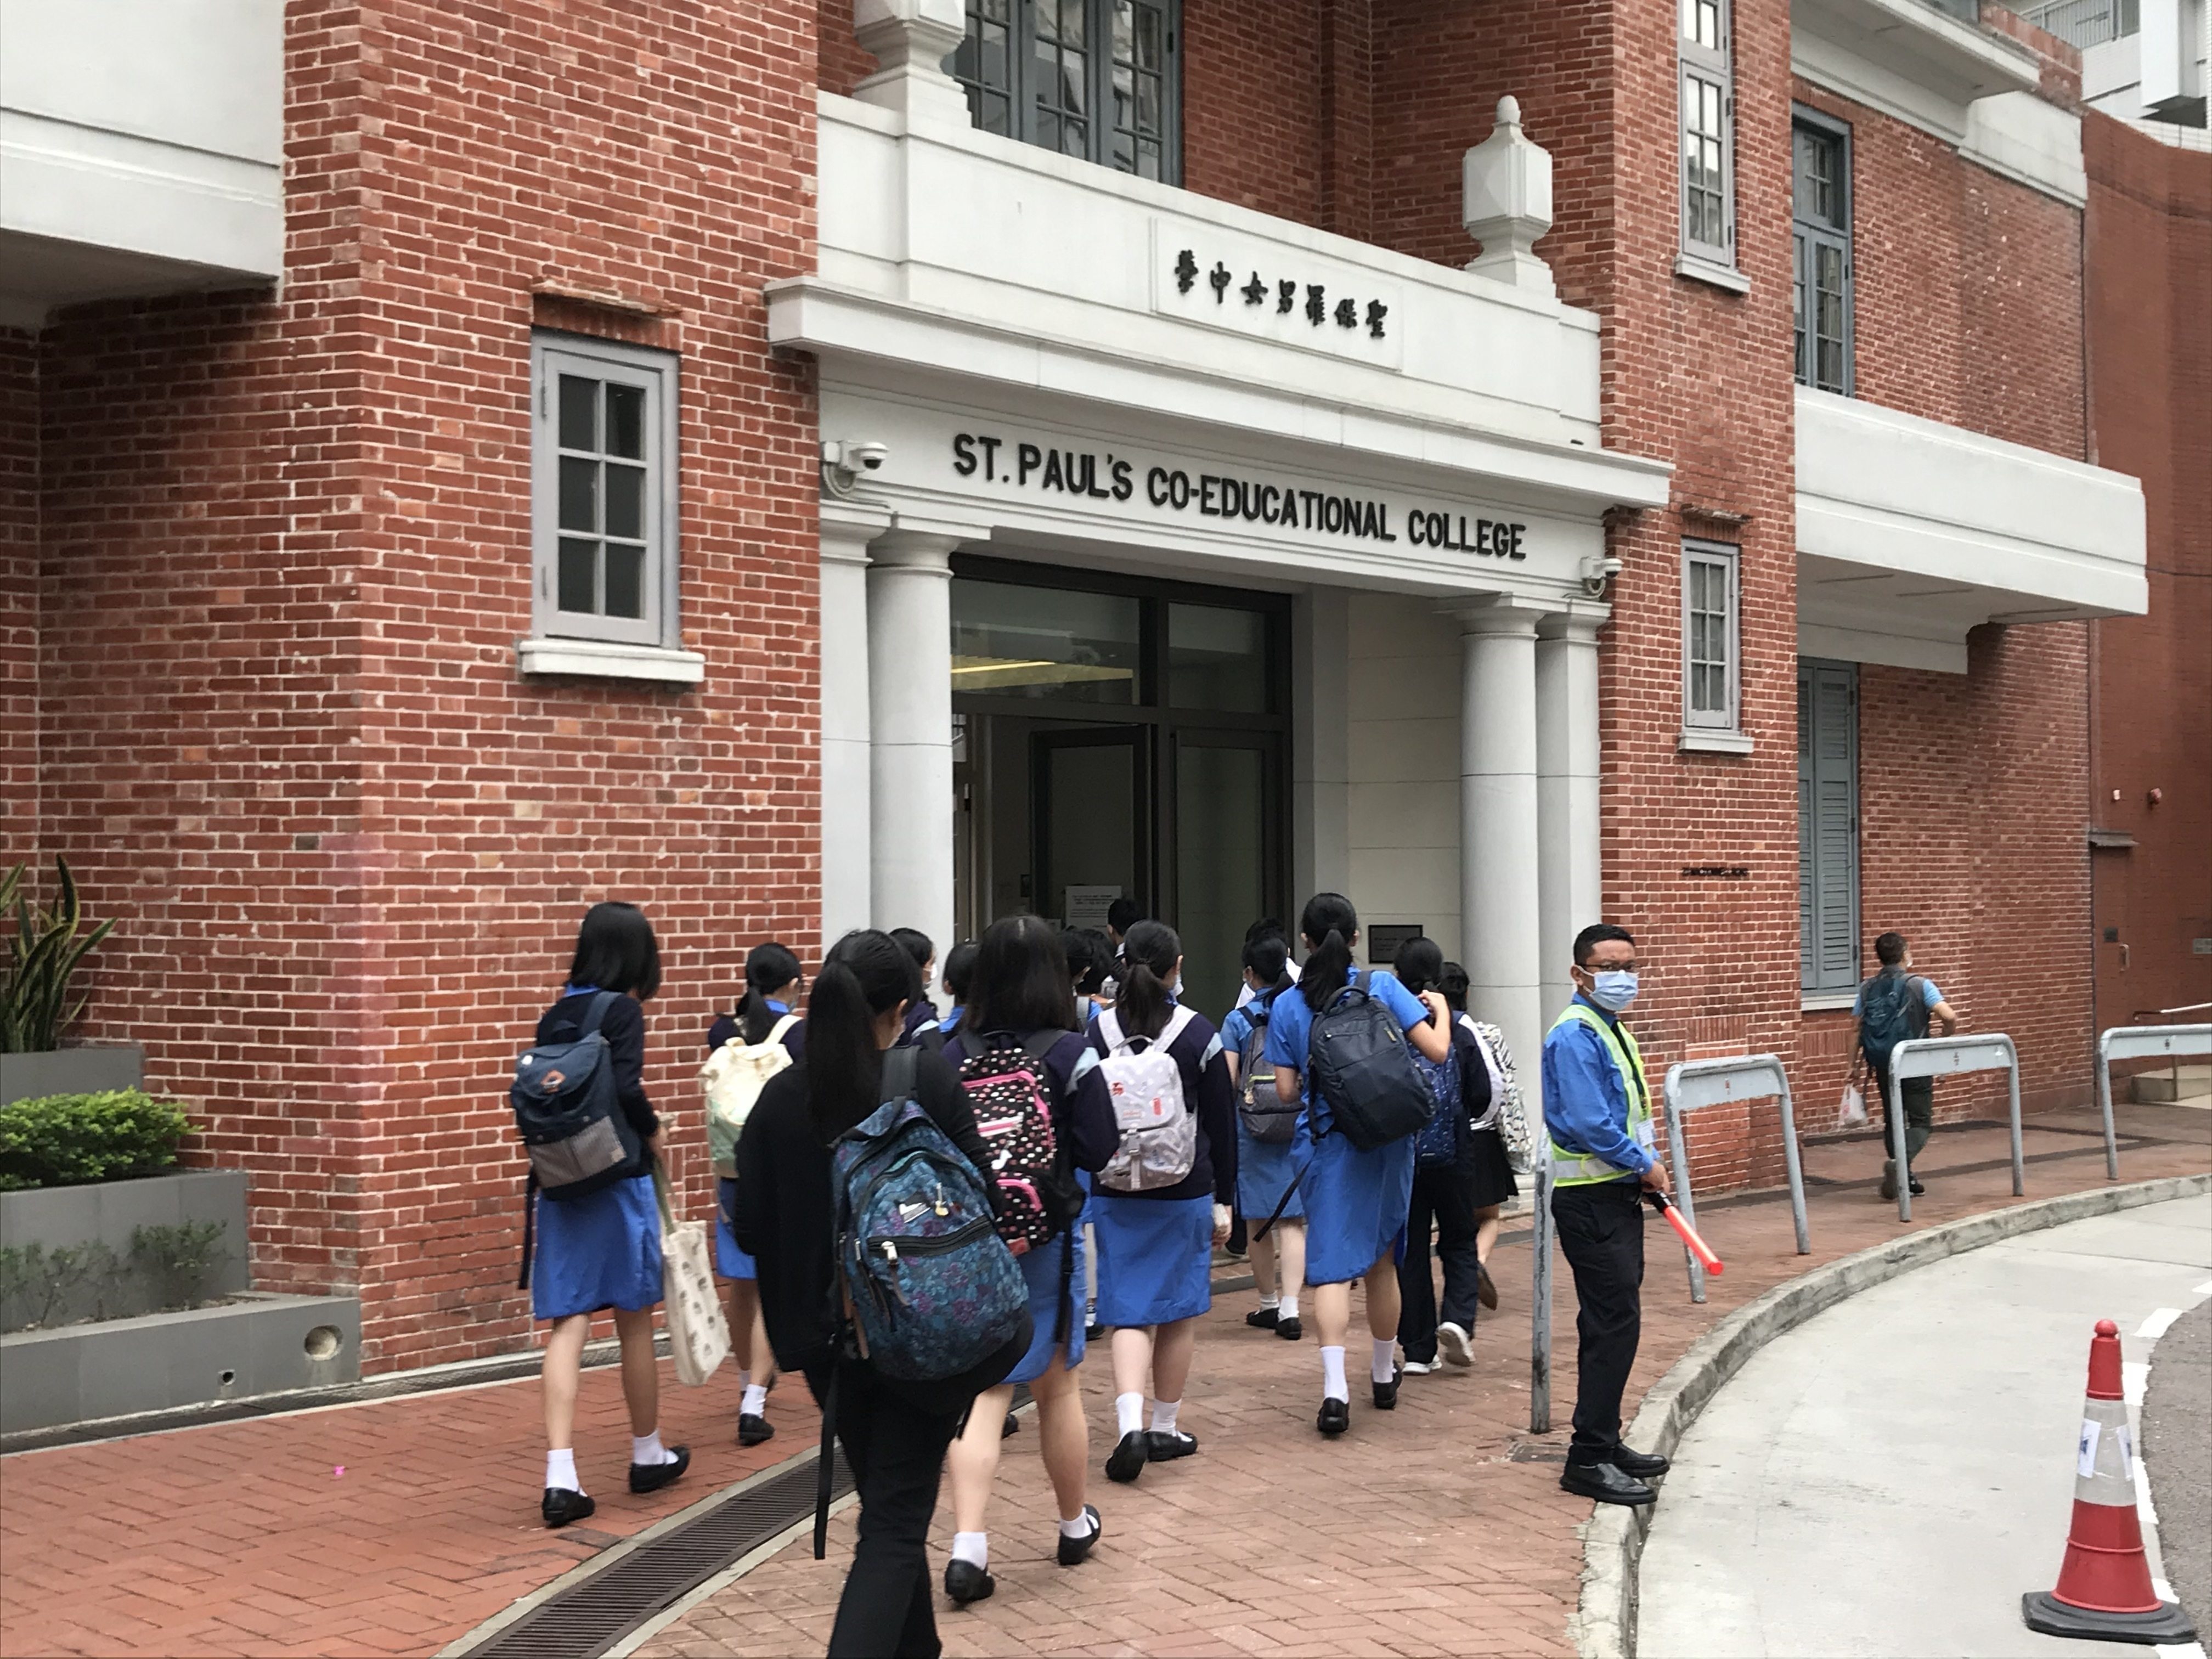 There are data privacy concerns at St Paul’s Co-educational College after management inspects personal computers of students. Photo: SCMP